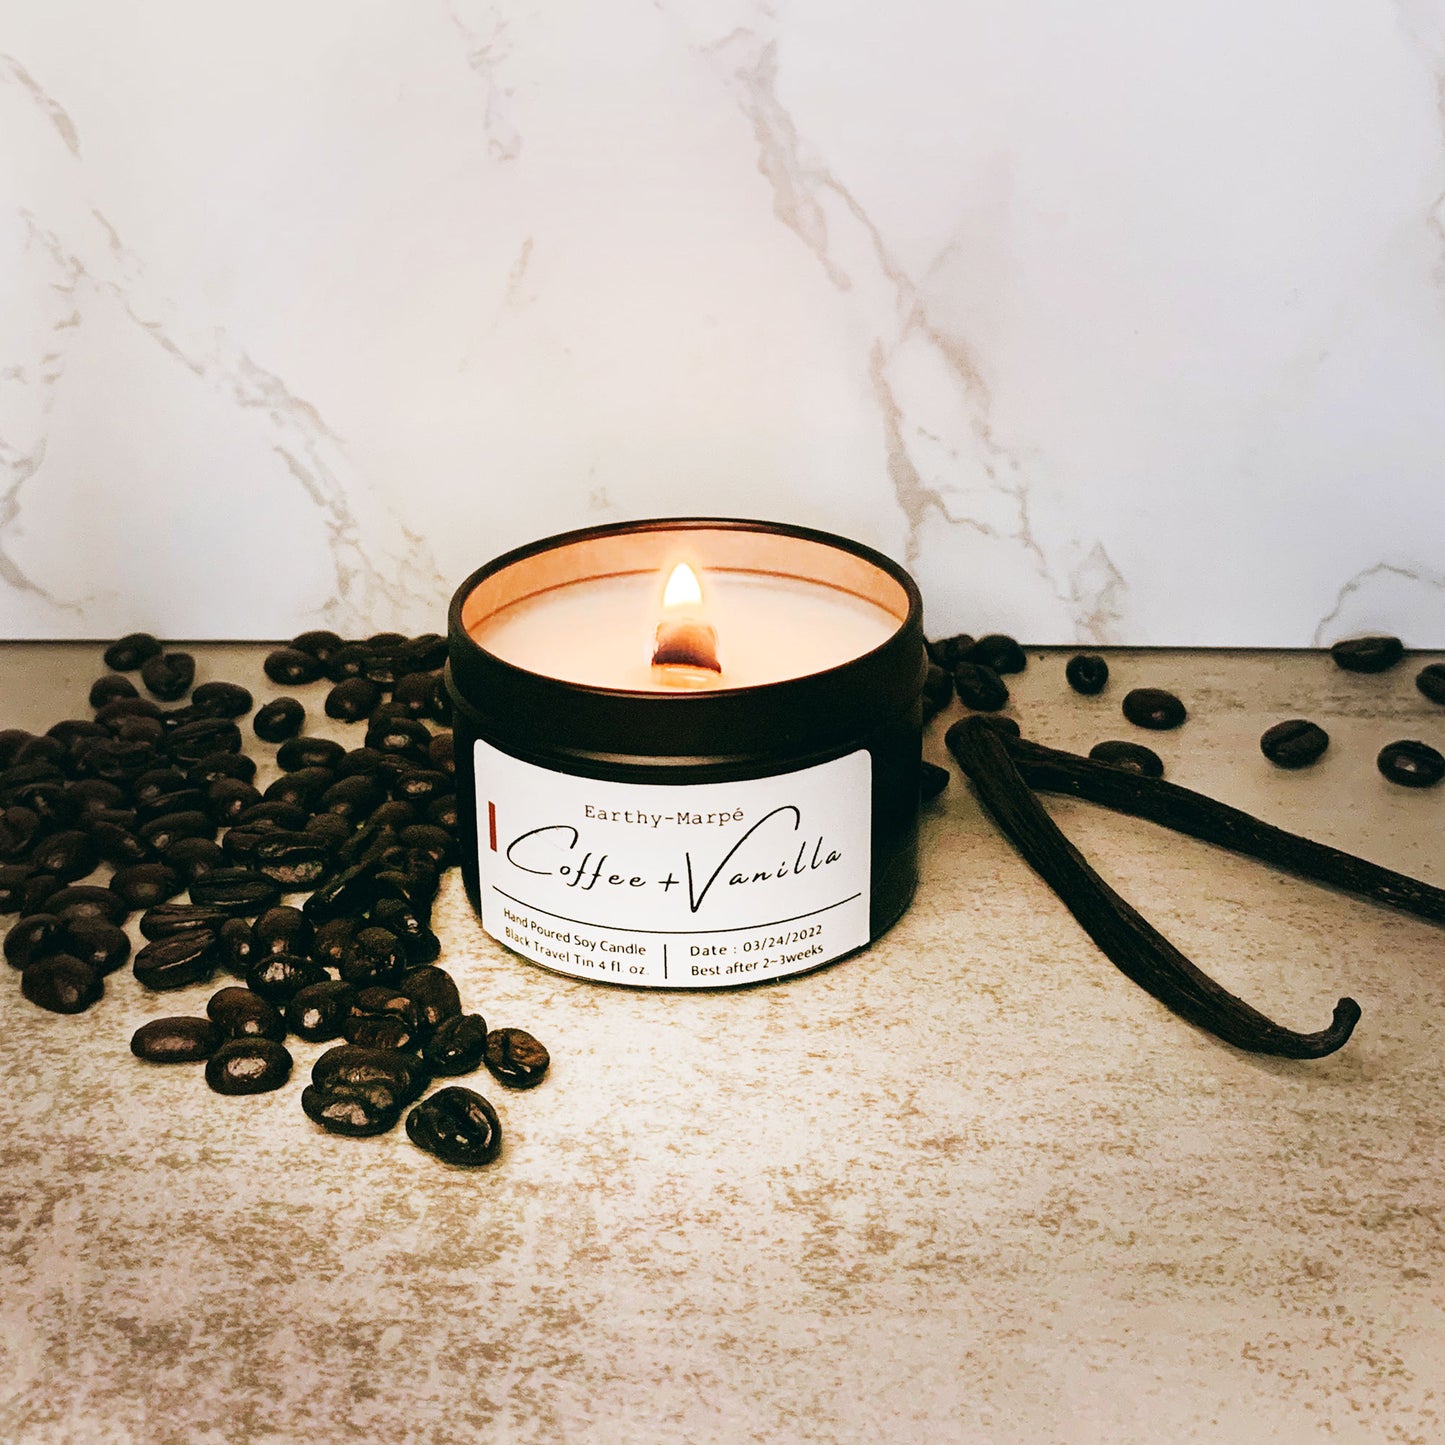 Rose Garden Hand Poured Soy Candle, Crackling Wooden Wick Candle